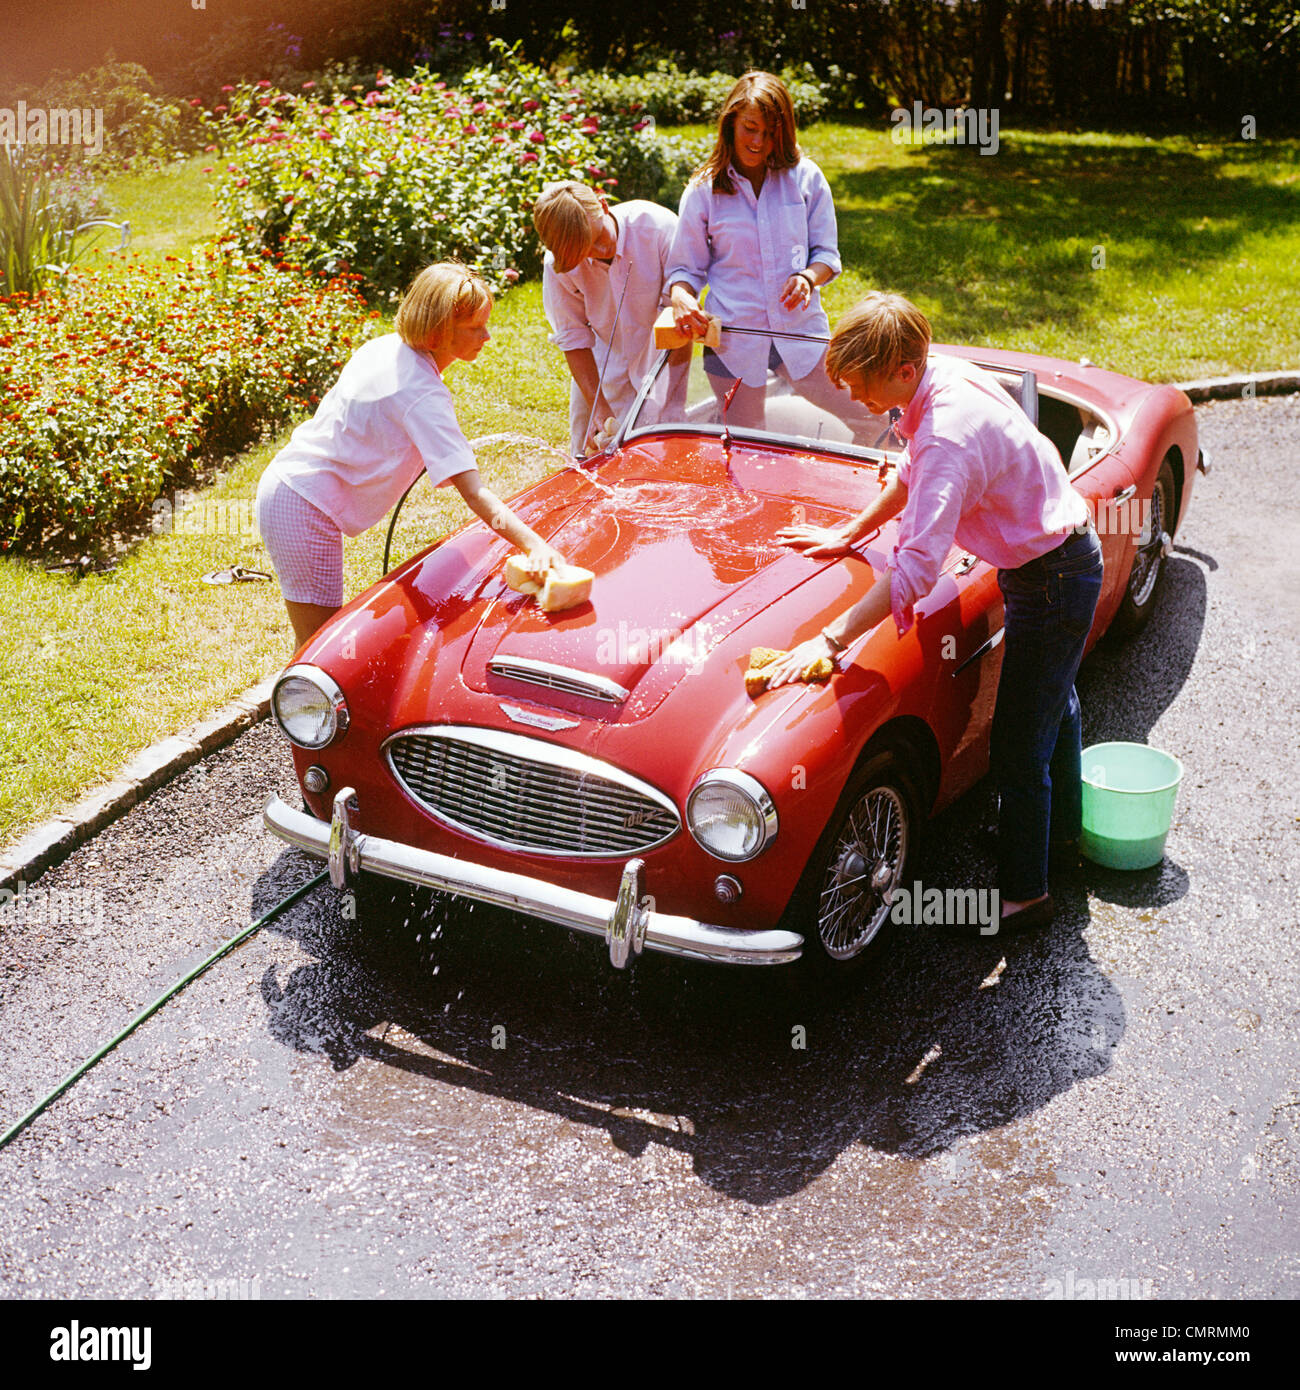 1970s FOUR TEENAGERS WASHING RED AUSTIN HEALEY SPORTS CONVERTIBLE AUTOMOBILE MAN WOMAN OVERHEAD OUTDOOR Stock Photo